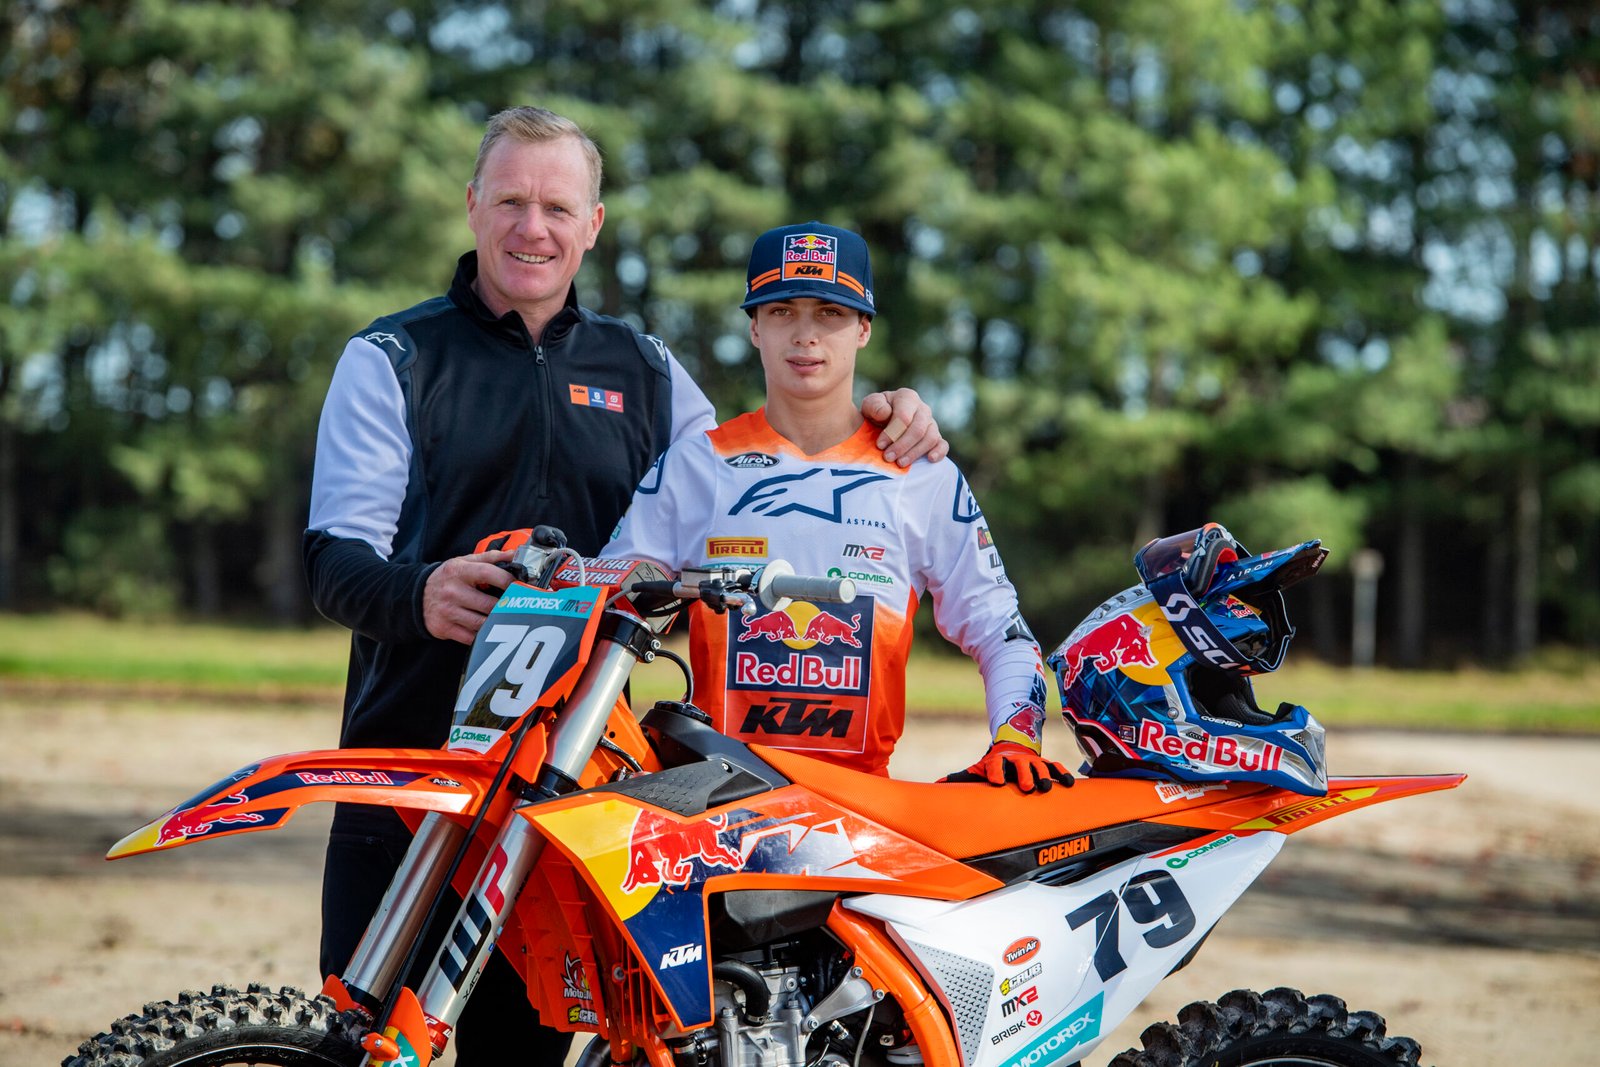 SACHA COENEN TO MAKE FULL-TIME MX2 DEBUT WITH RED BULL KTM FACTORY RACING